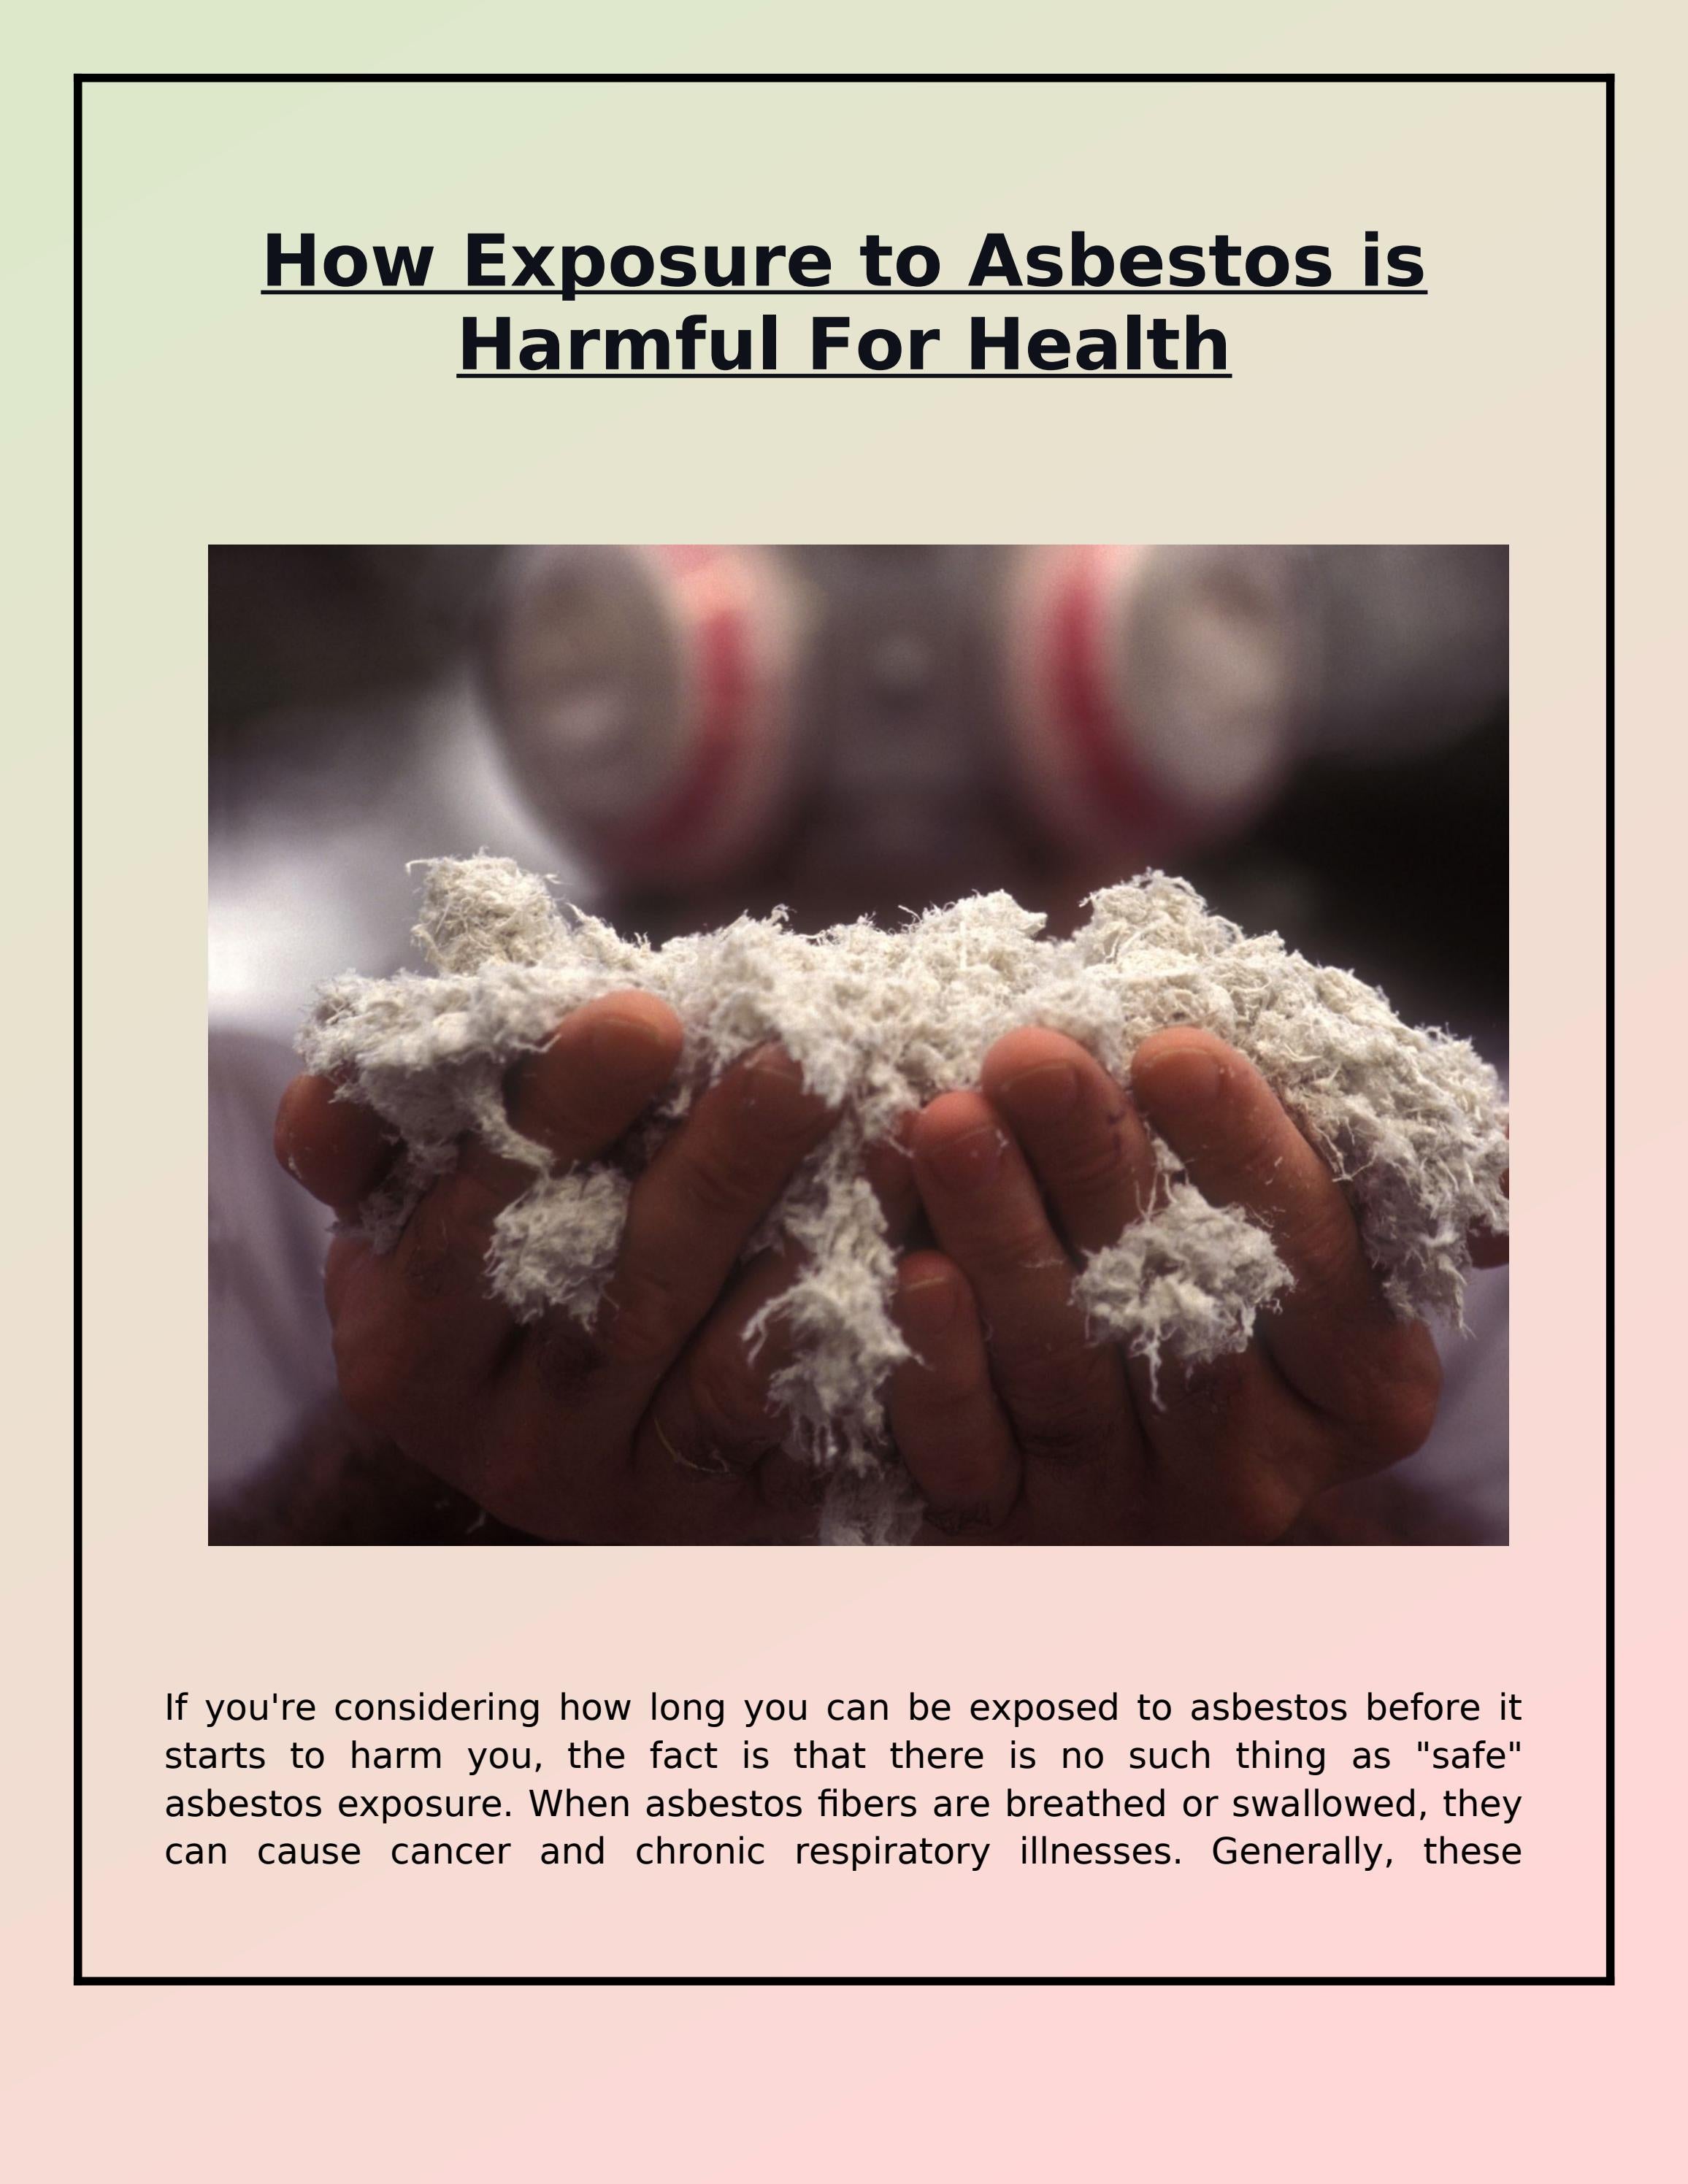 How Exposure to Asbestos is Harmful For Health